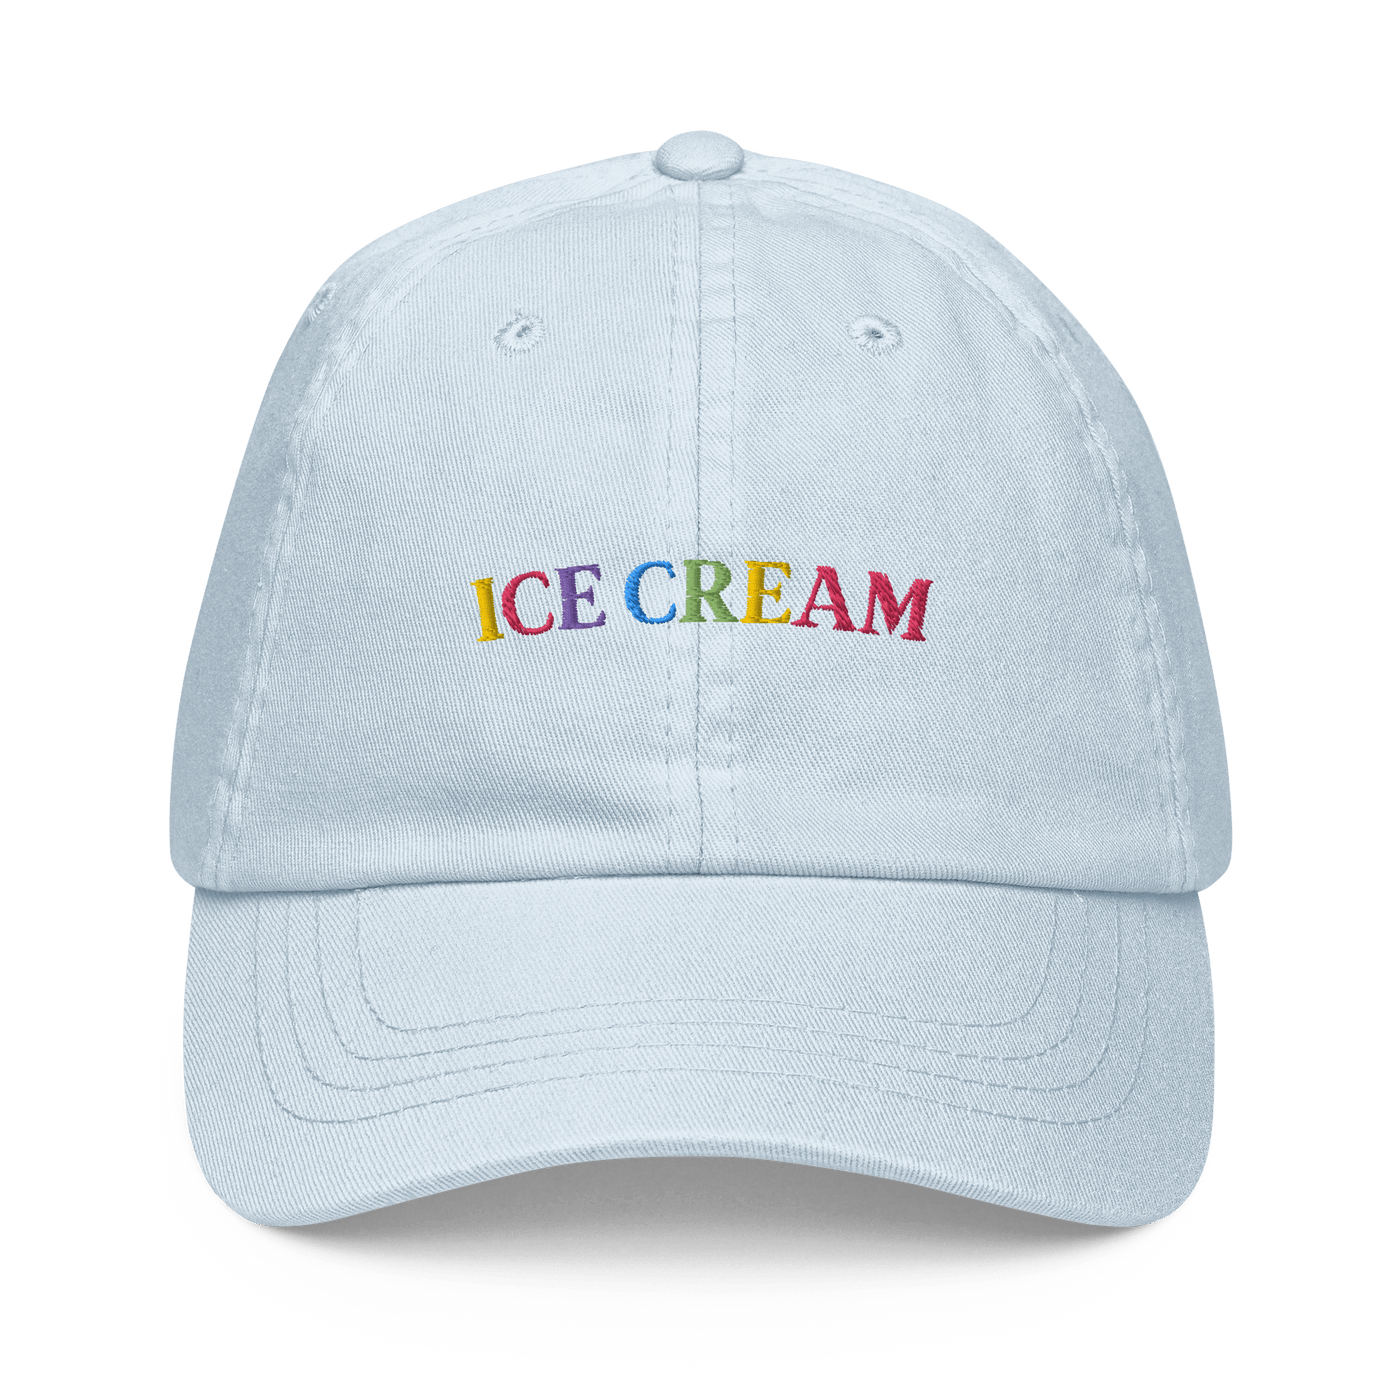 Ice Cream Text Pastel hat - Pastel Blue - - Just Another Cap Store